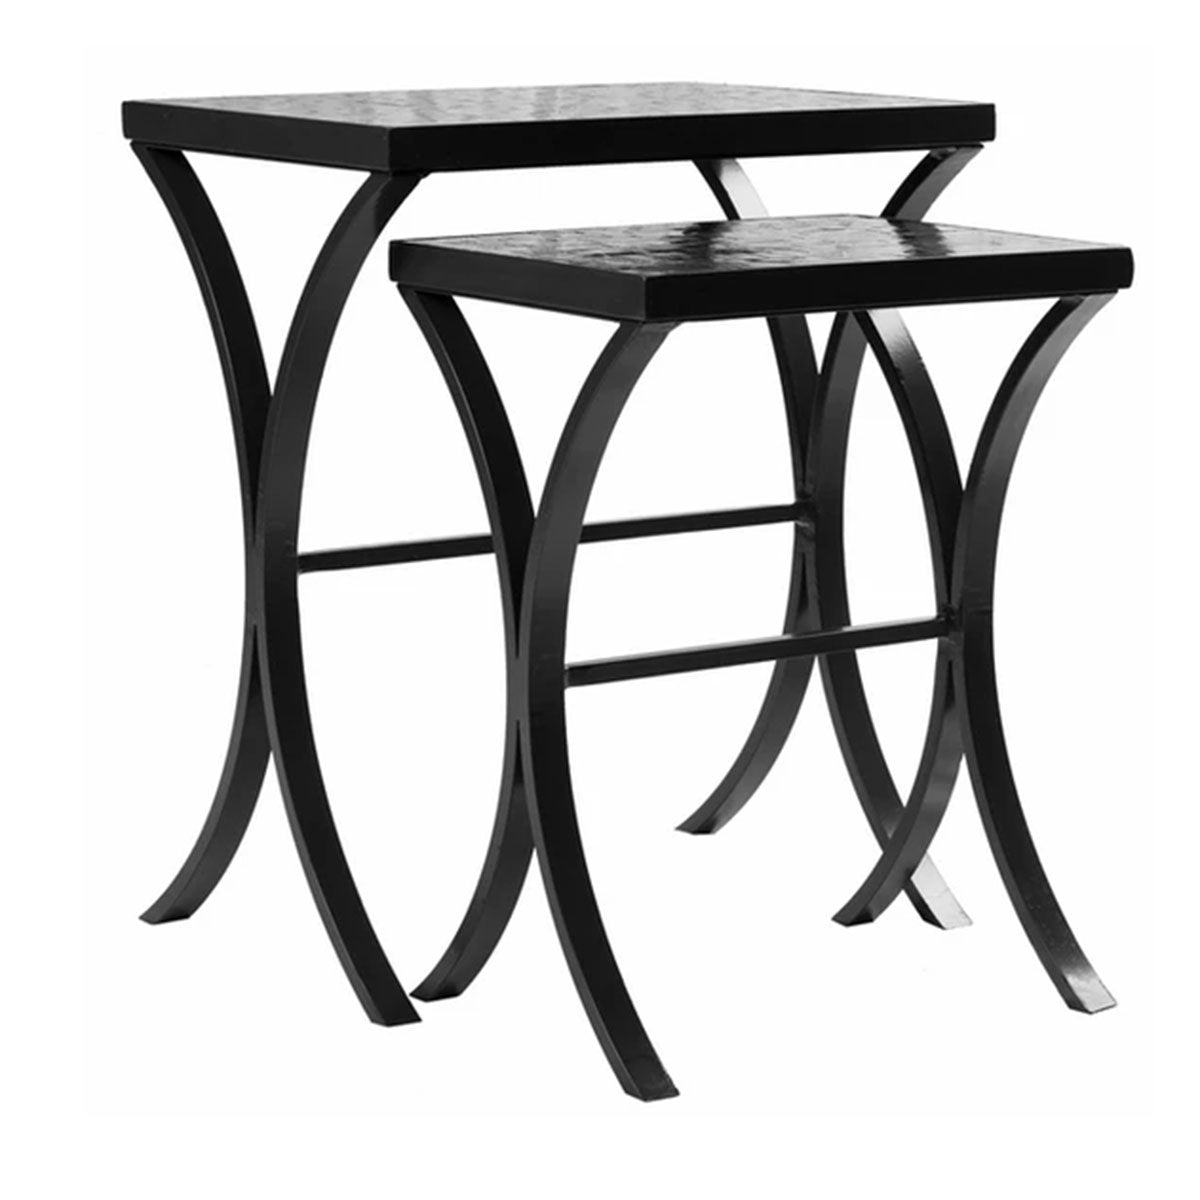 Jade Glass Mosaic Nesting Tables-Iron Accents